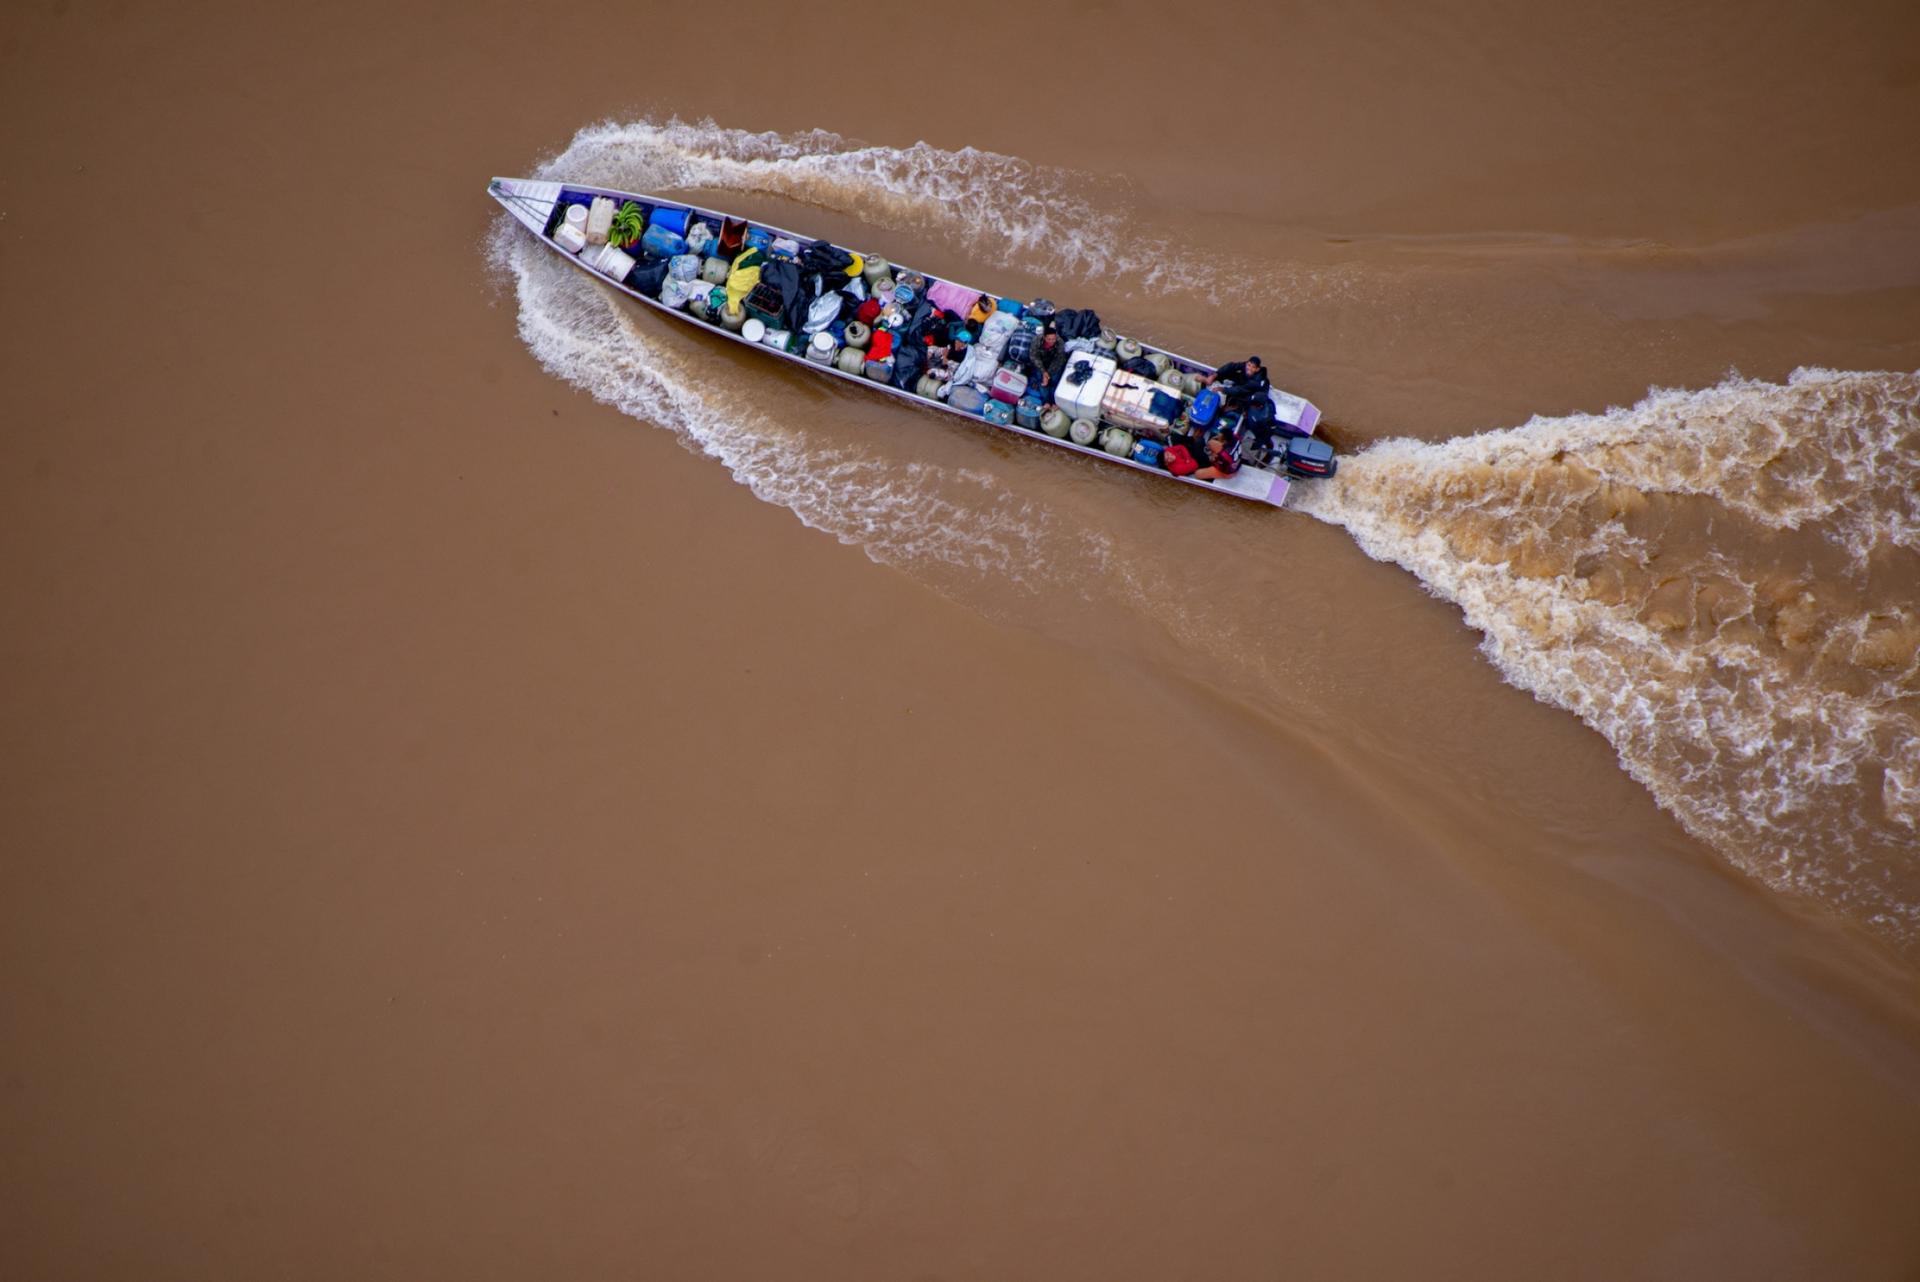 A boat transporting equipment for illegal mining operations in Yanomami Territory.